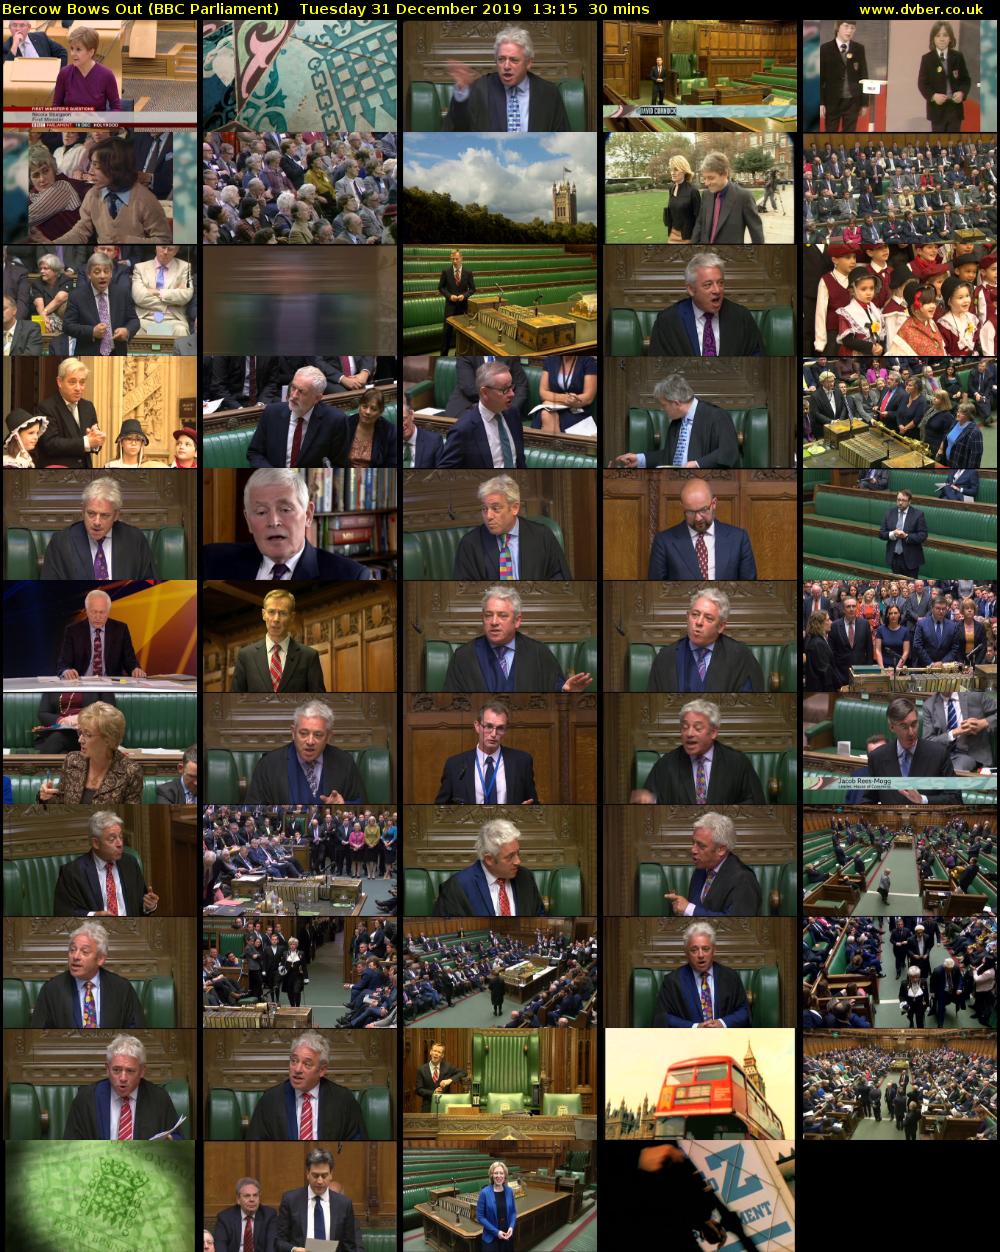 Bercow Bows Out (BBC Parliament) Tuesday 31 December 2019 13:15 - 13:45